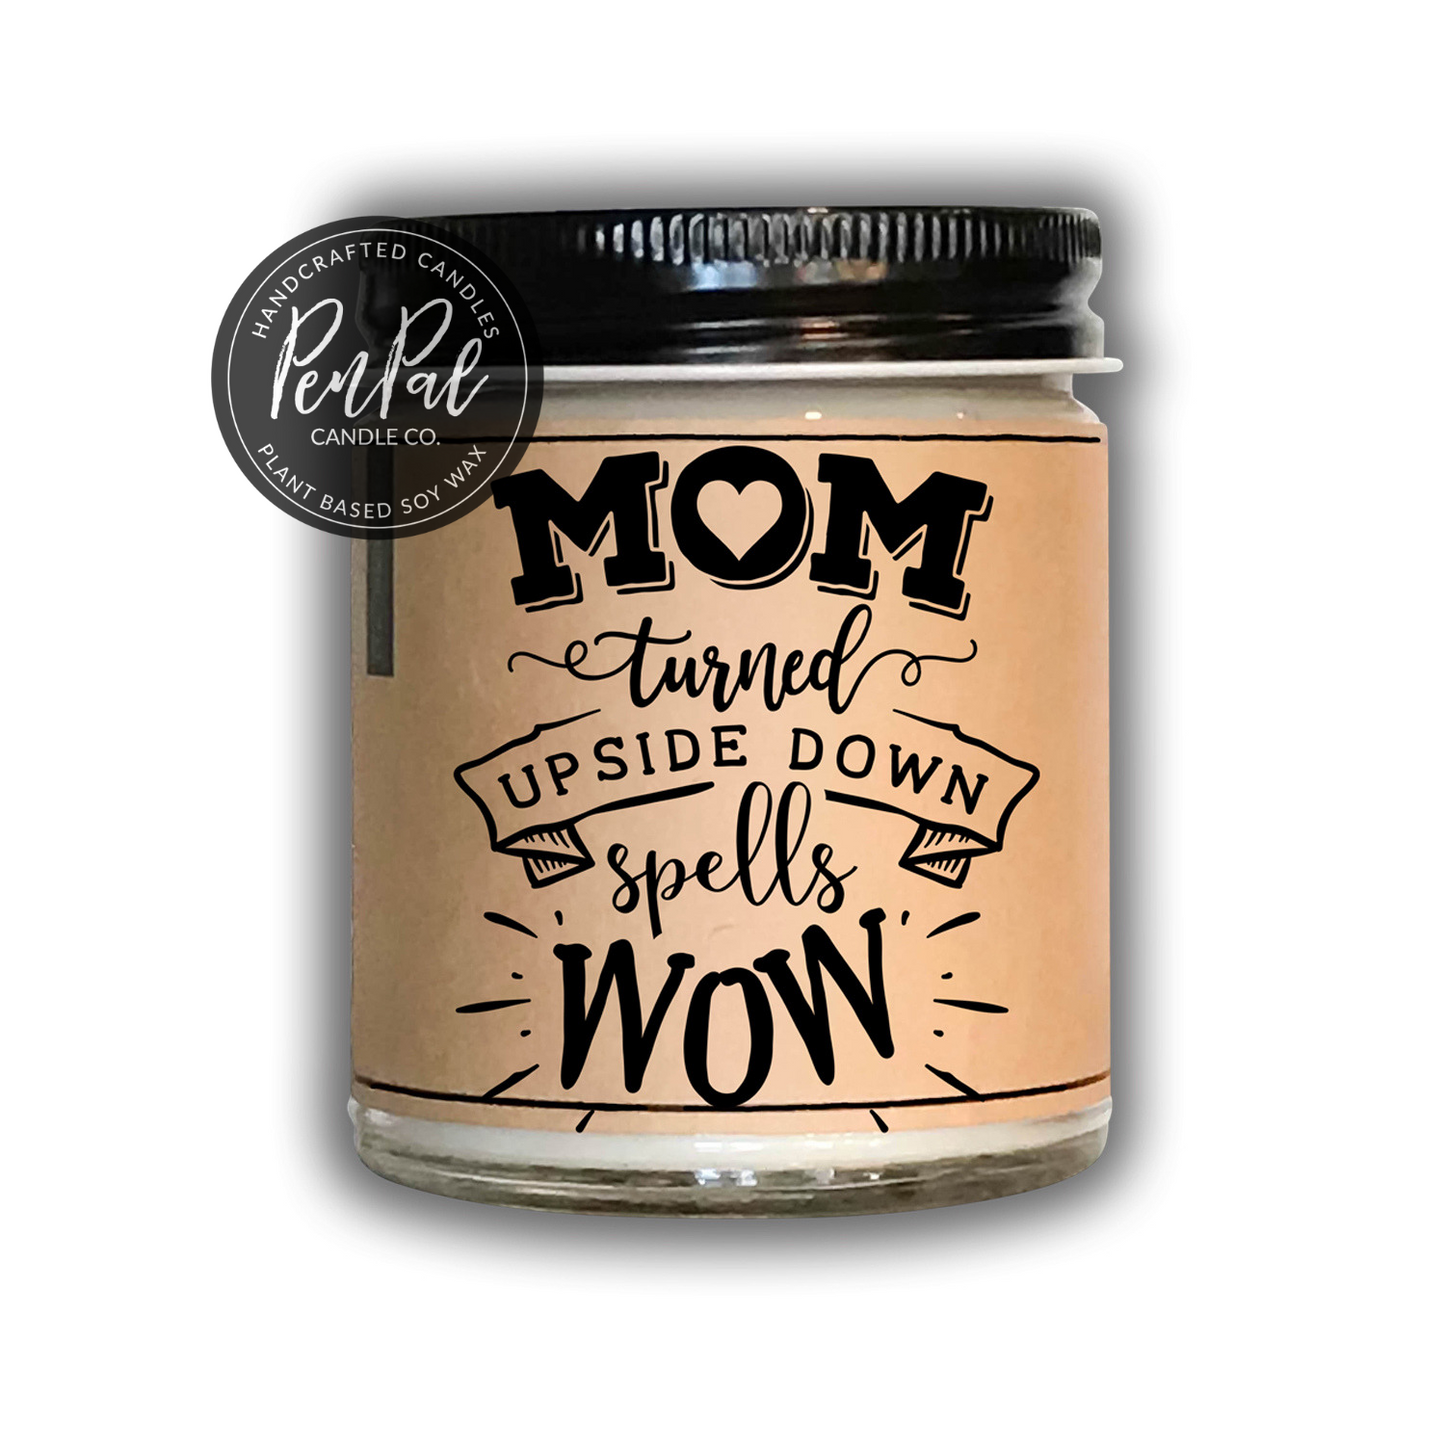 Mom Turned Up Side Down Spells Wow - Scented Candle - Mom -